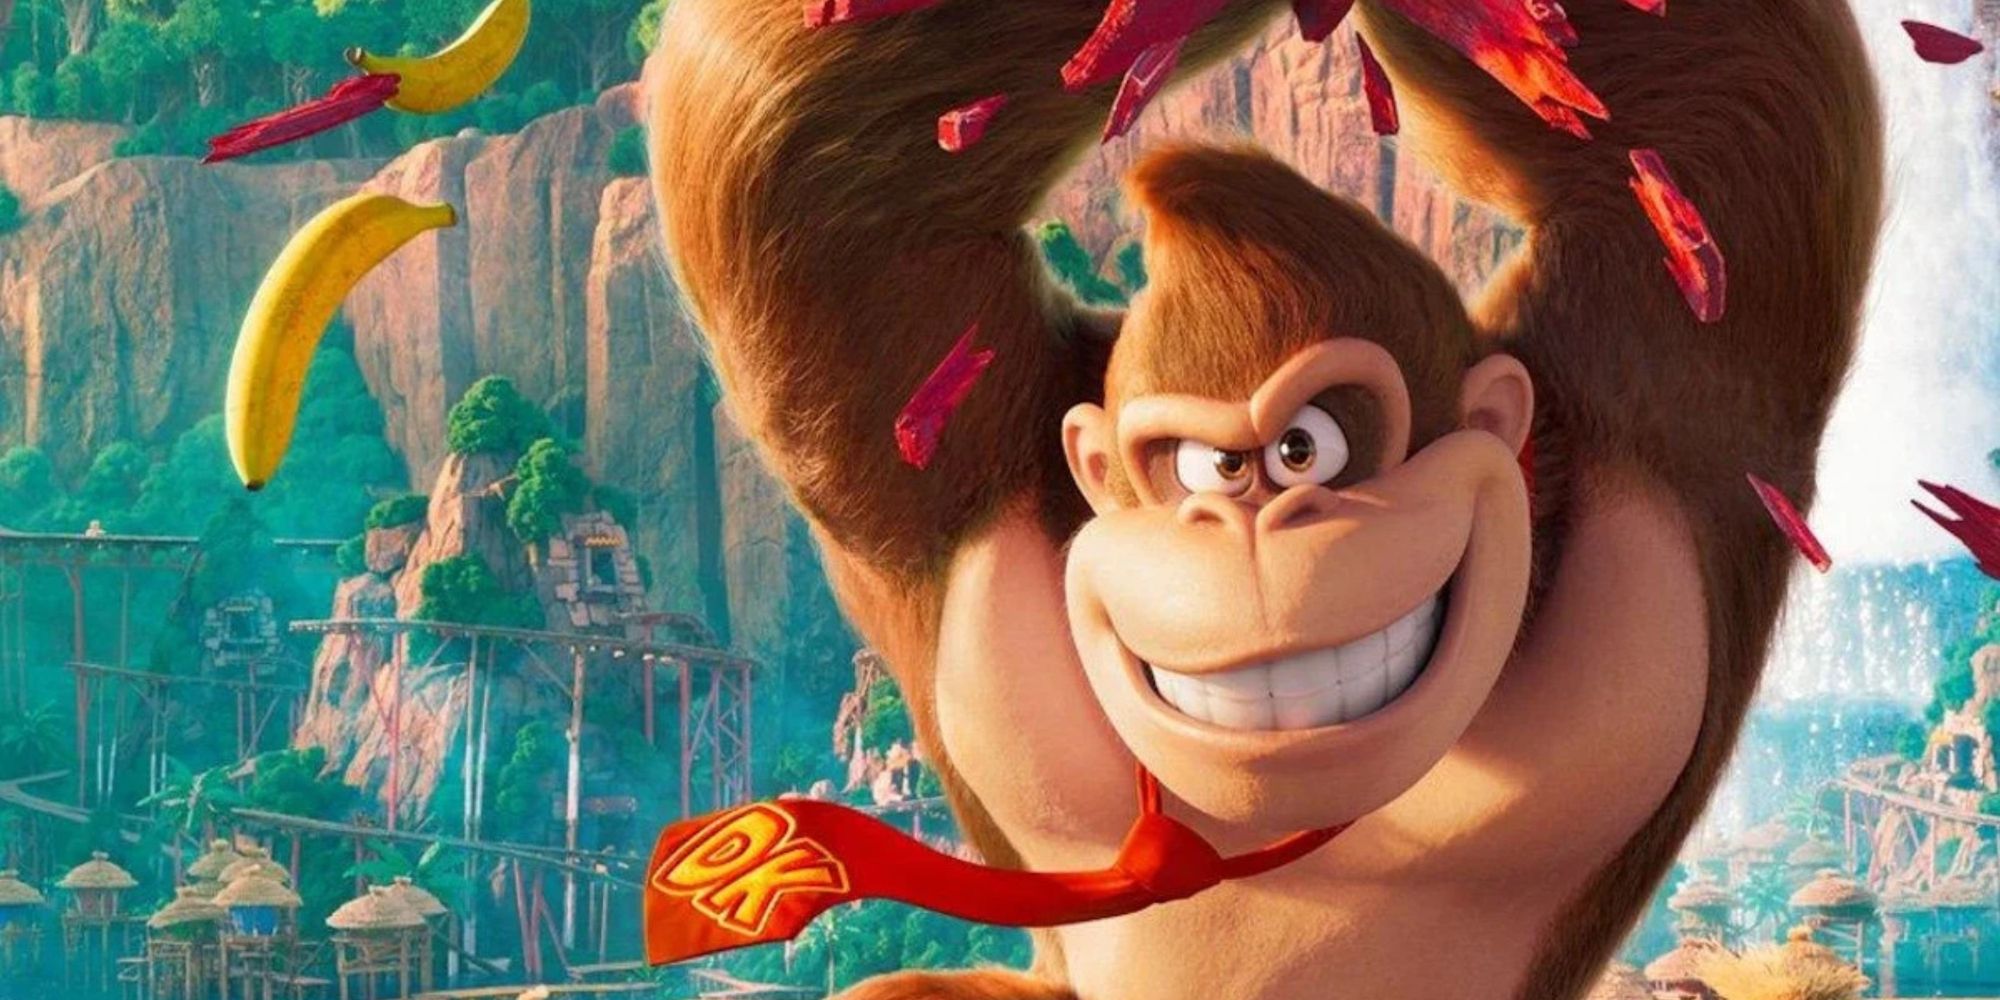 Seth Rogen Says Donkey Kong Will “Sound Like Me And That’s It” In Mario Movie